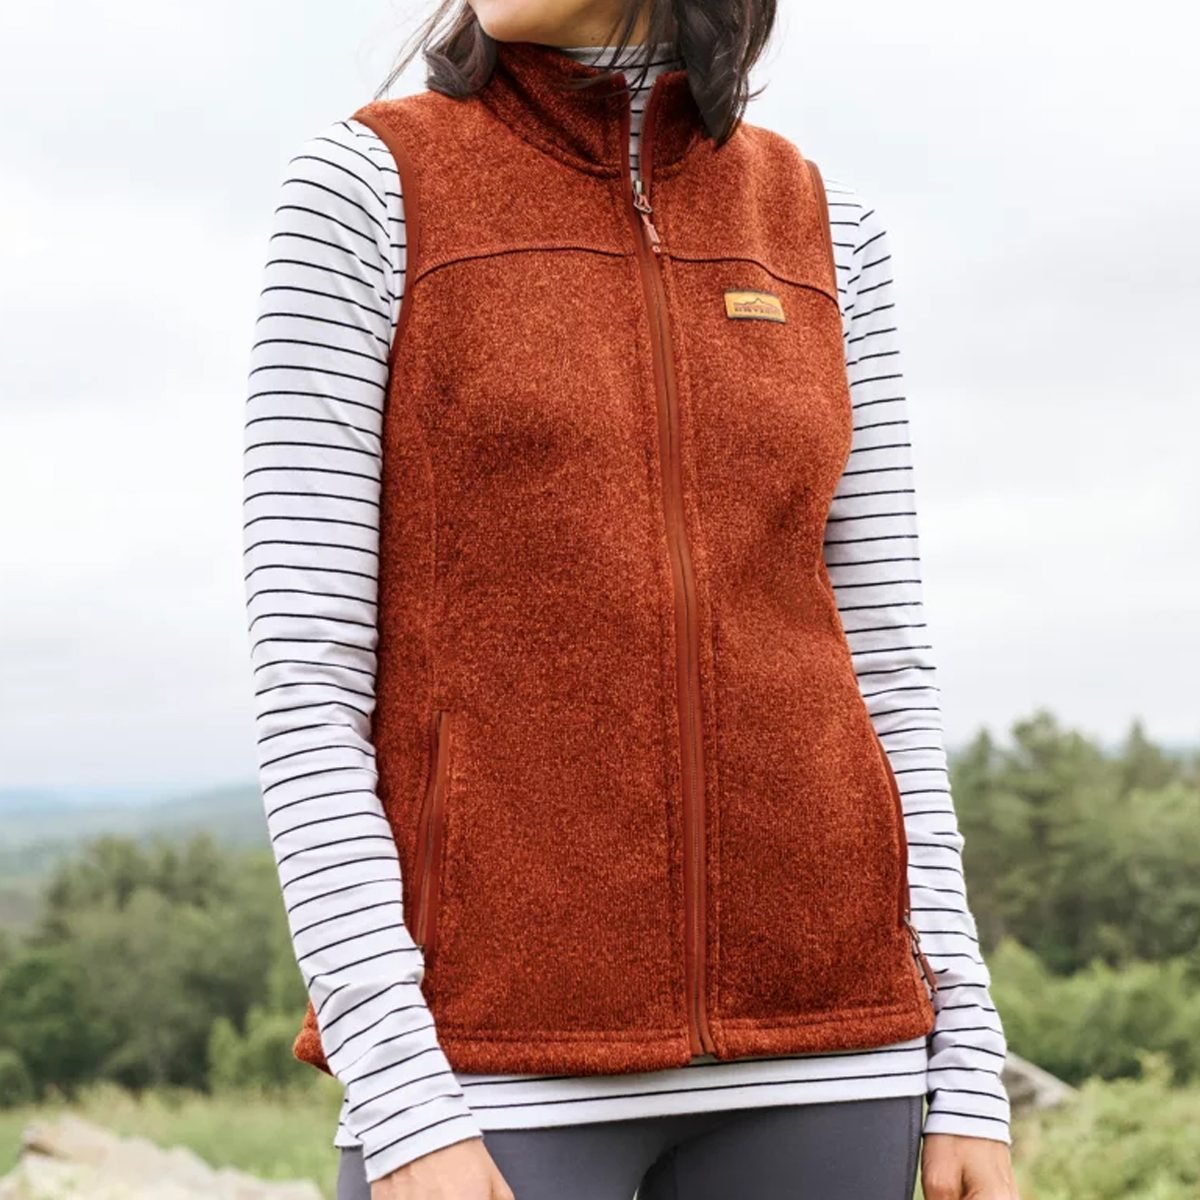 6 Best Fleece Vests for Working Outside This Fall